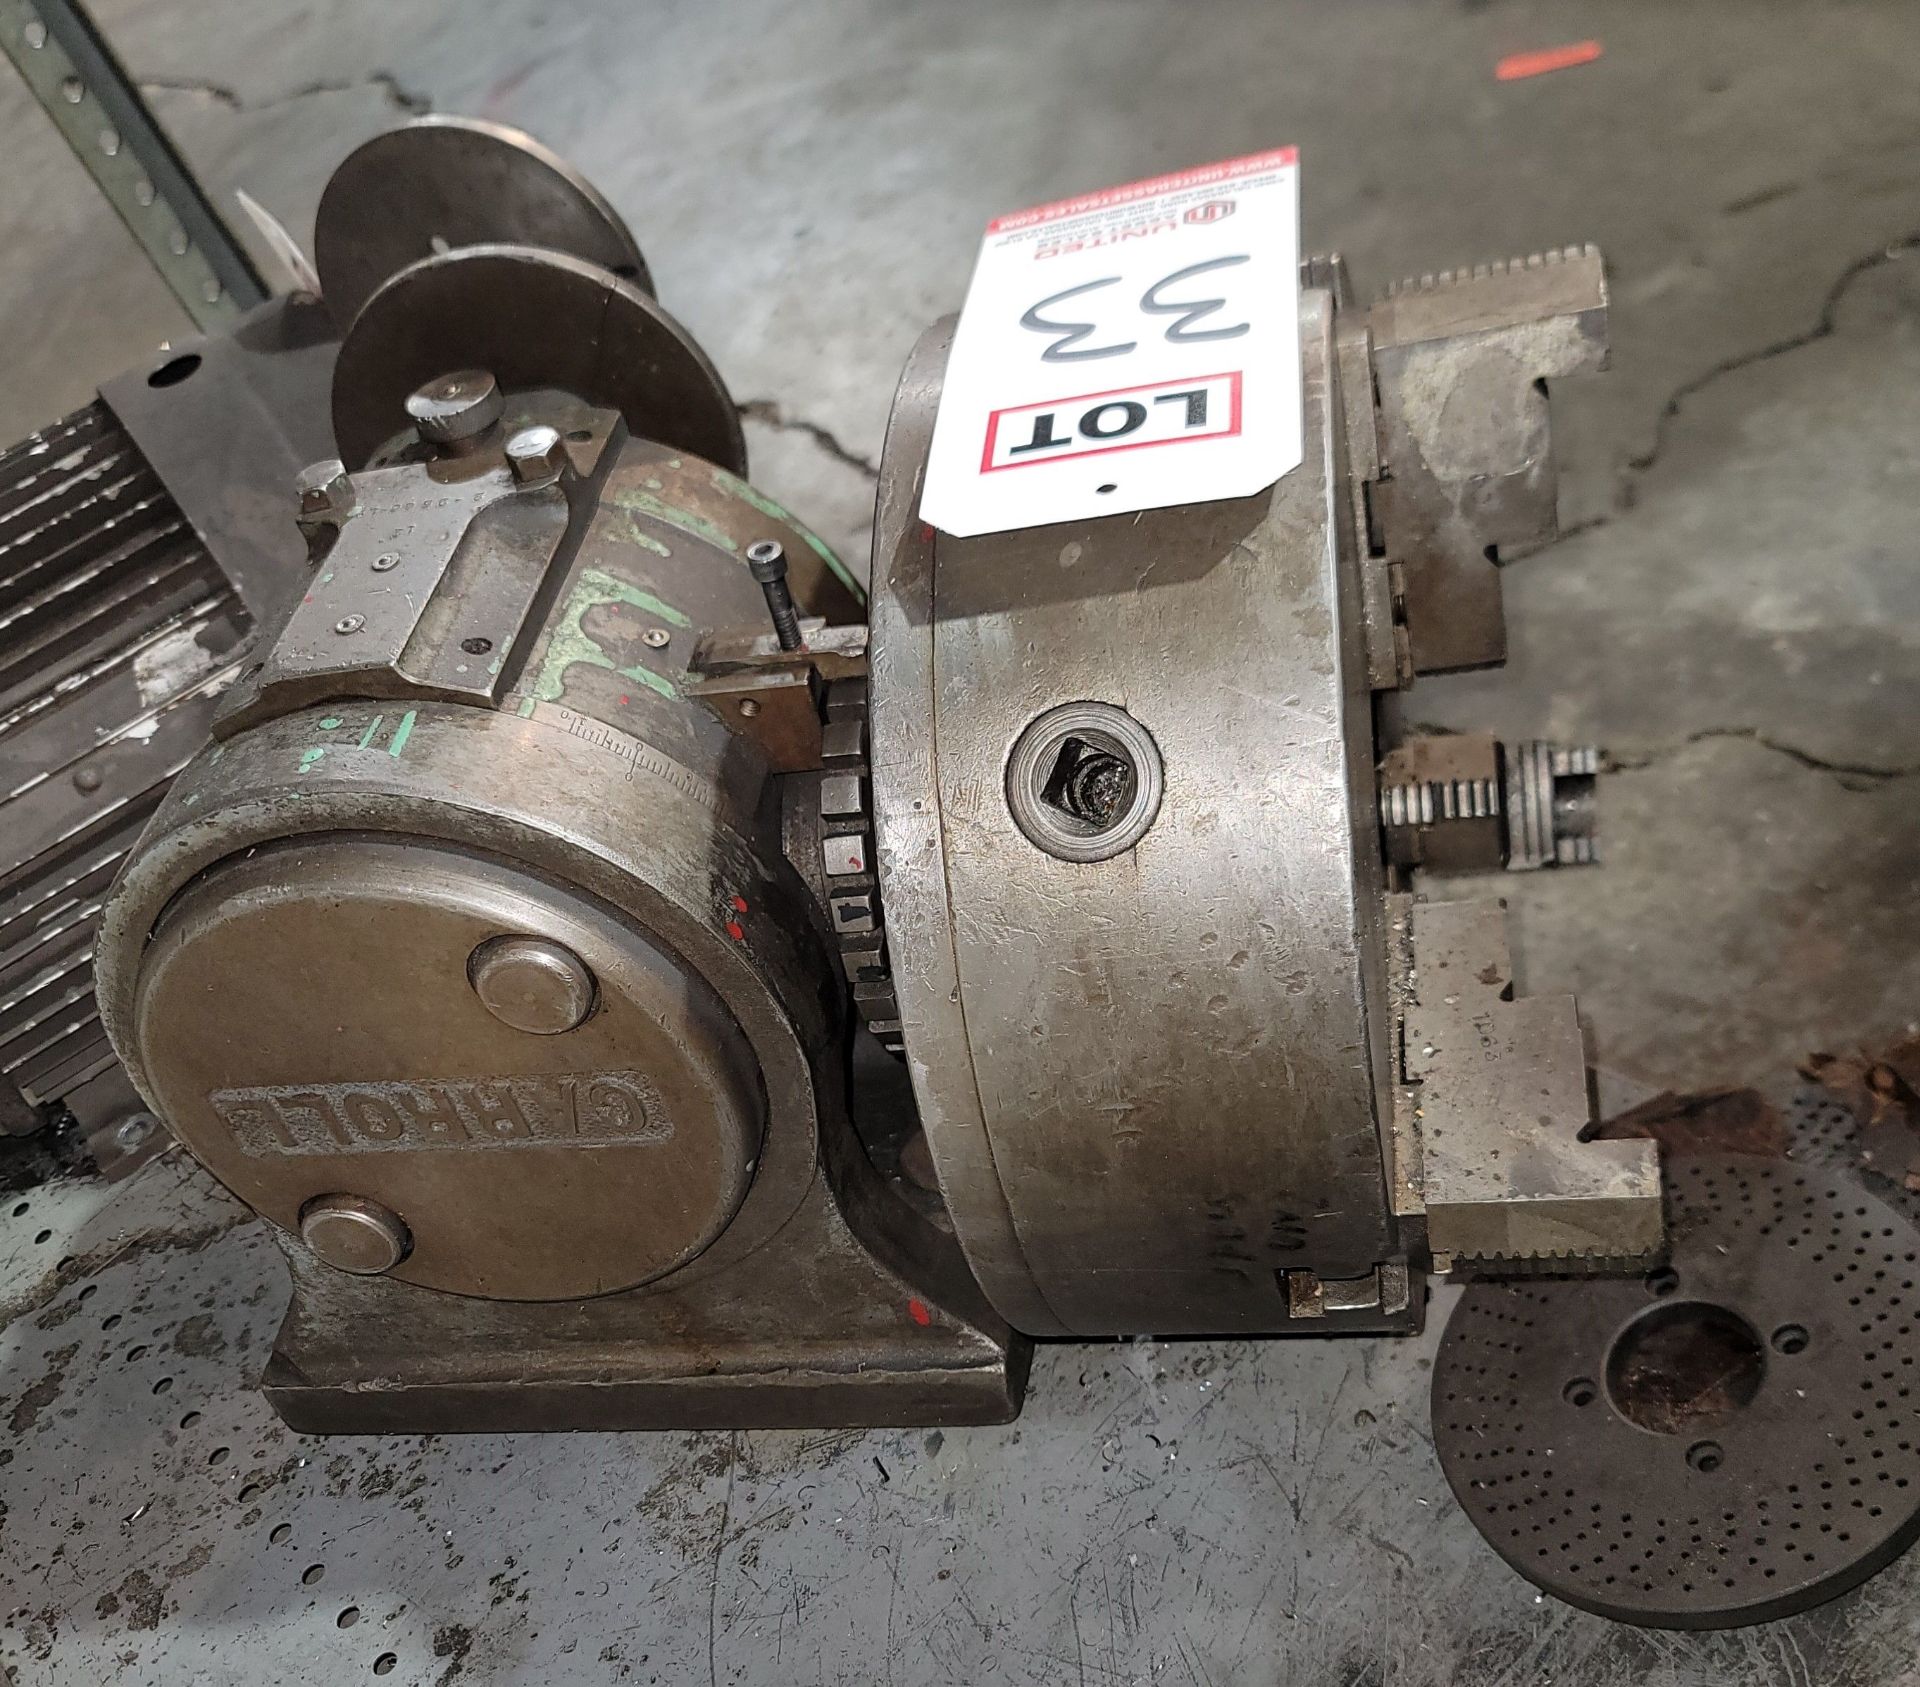 LOT - CARROLL INDEXING FIXTURE W/ 11" 3-JAW CHUCK - Image 2 of 2